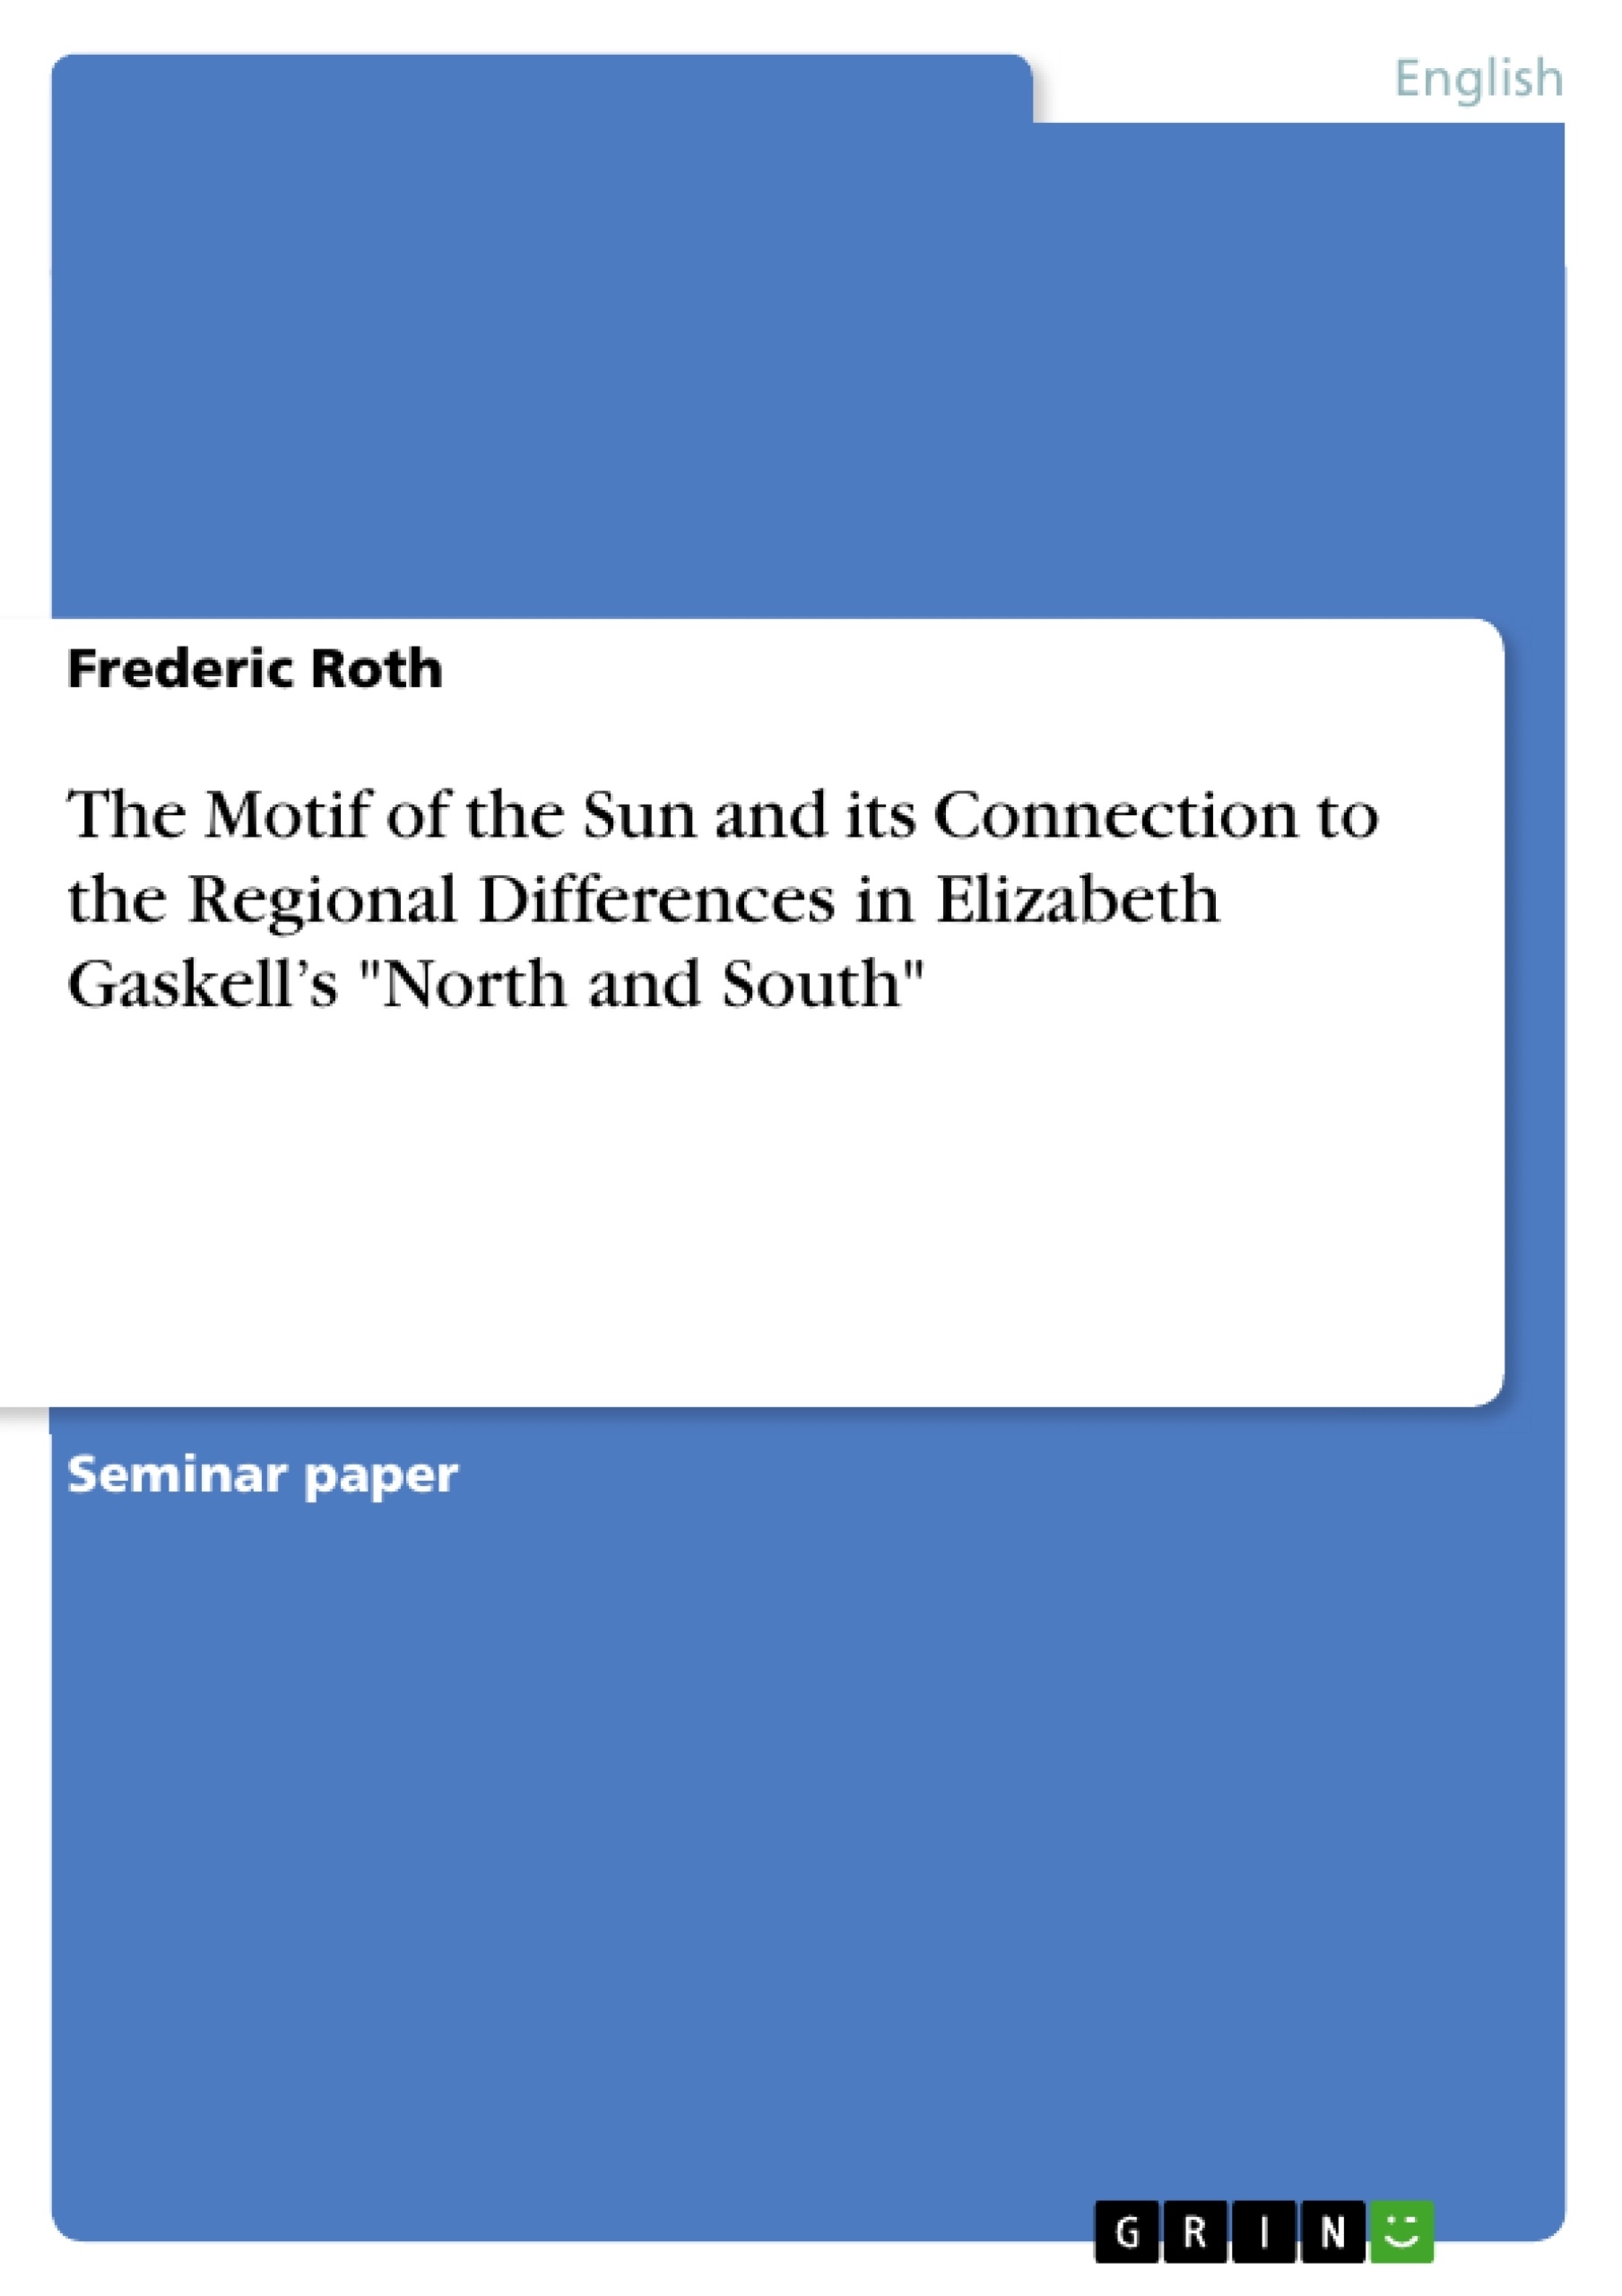 Titel: The Motif of the Sun and its Connection to the Regional Differences  in Elizabeth Gaskell’s "North and South"